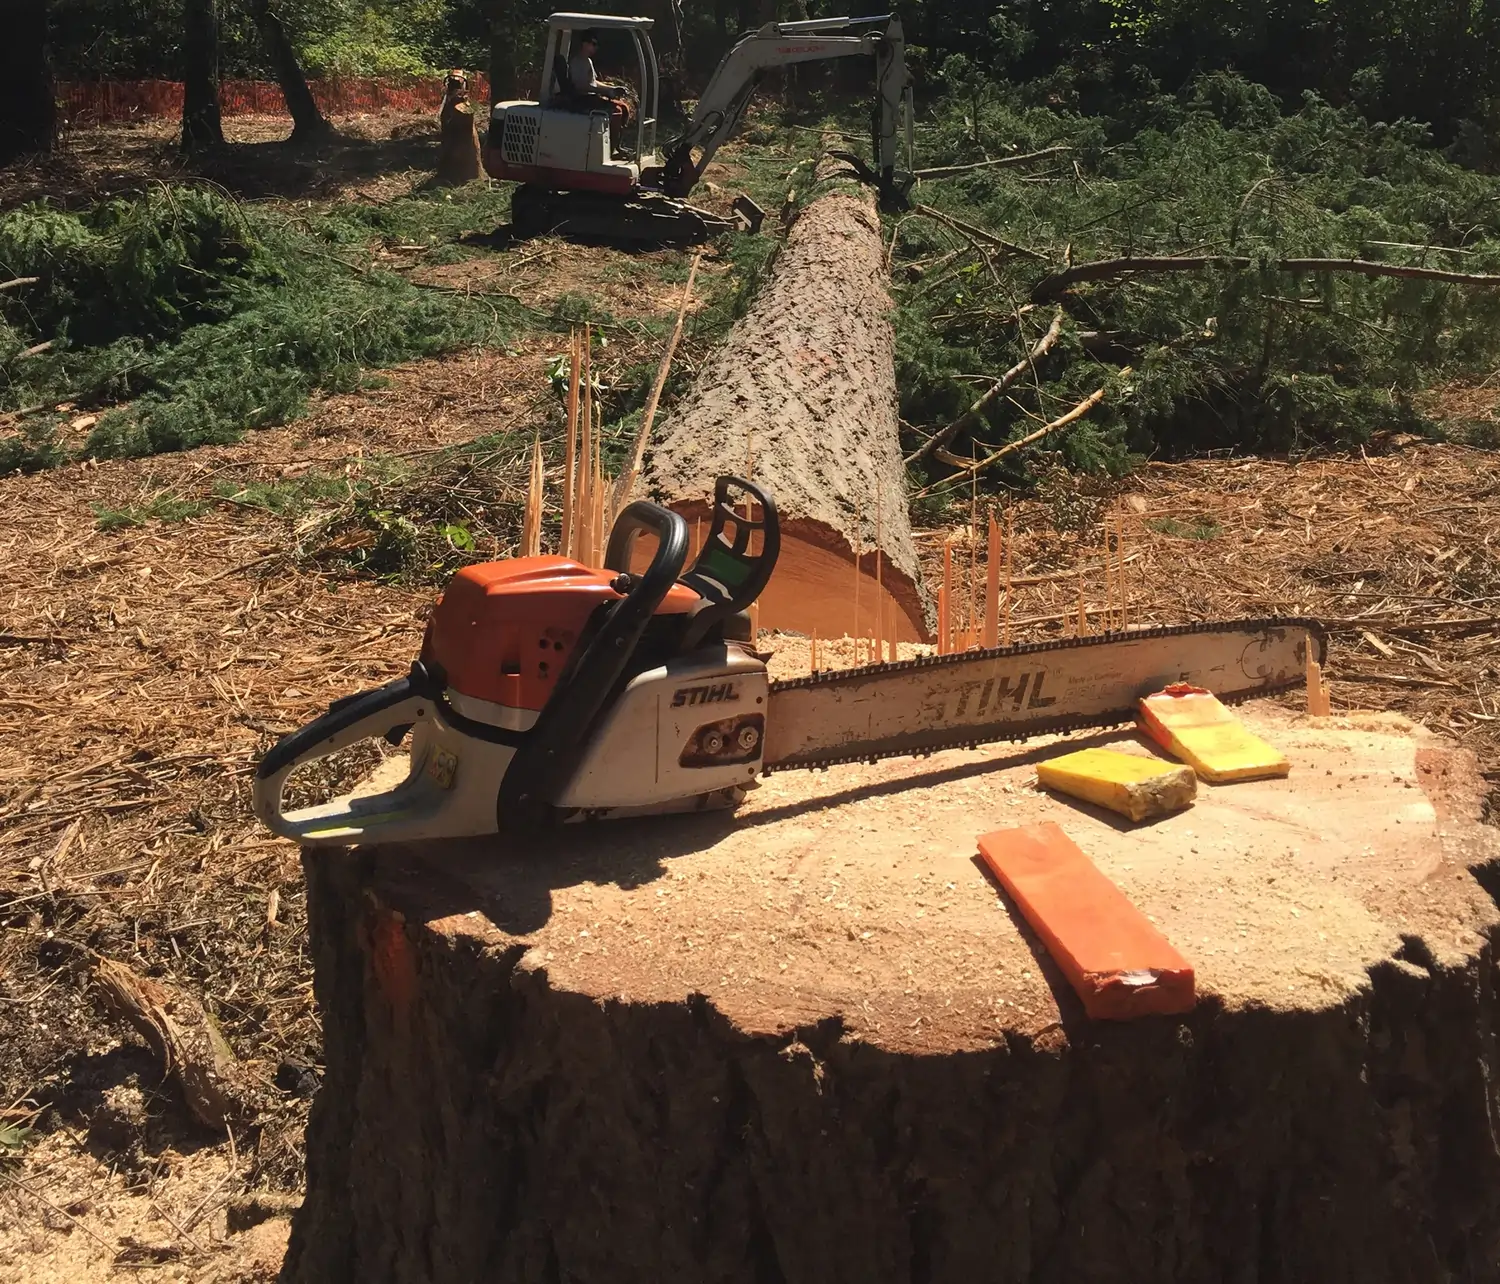 Chainsaw on a stump